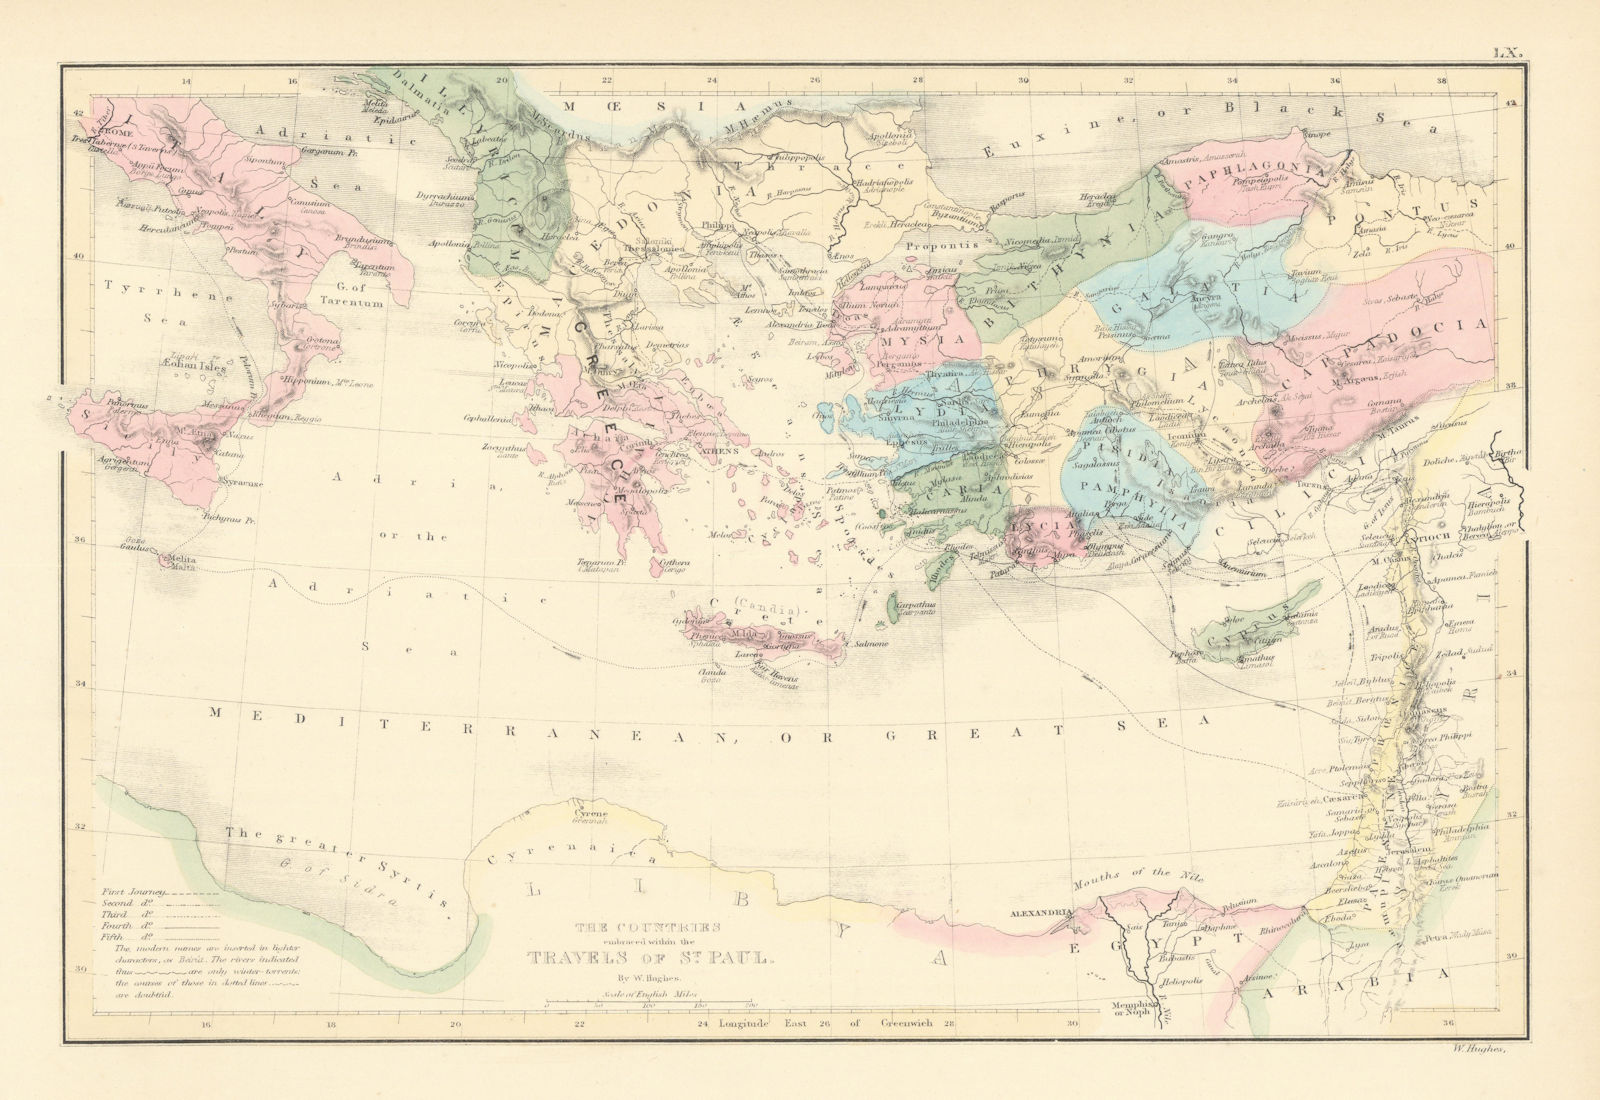 Countries embraced within the travels of St Paul. Mediterranean. HUGHES 1854 map